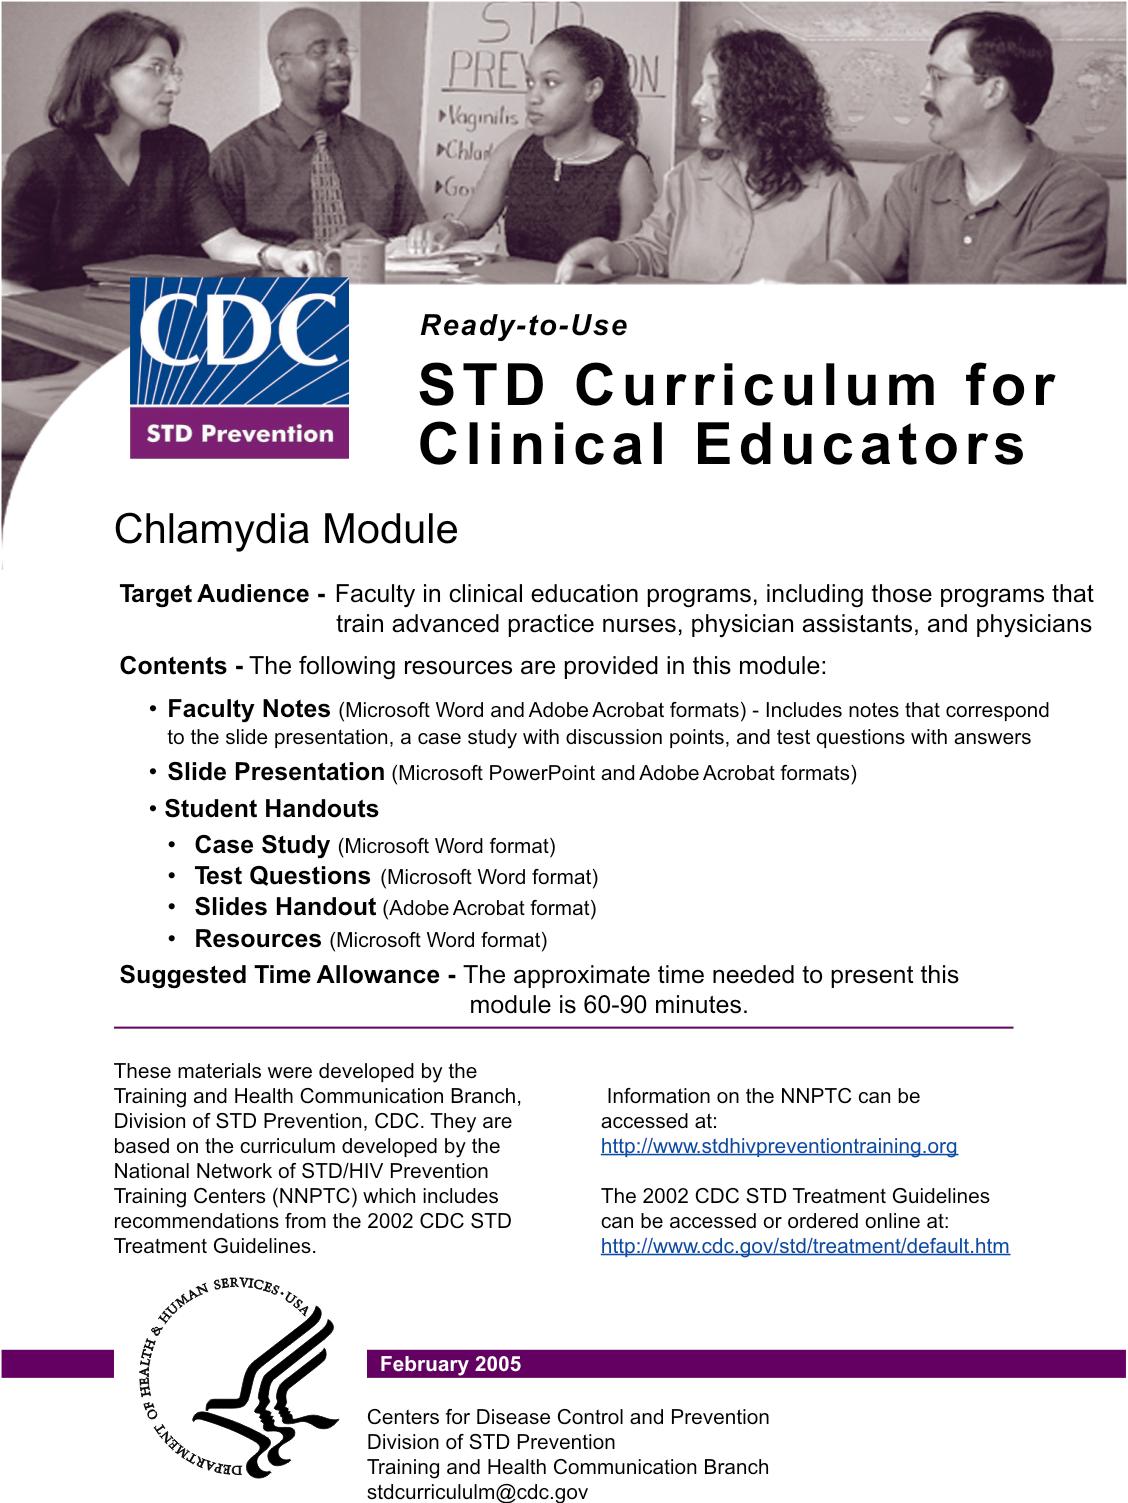 ready-to-use std curriculum for clinical educators chlamydia module target audience - faculty in clinical education programs, including those programs that train advanced practice nurses, physician assistants, and physicians contents - the following resources are provided in this module -faculty notes (microsoft word and adobe acrobat formats) - includes notes that correspond to the slide presentation, a case study with discussion points, and test questions with answers. -slide presentation (microsoft word and adobe acrobat formats) -student handouts --case study (microsoft word format) --test questions (microsoft word format) --slides handout (adobe acrobat format) --resources (microsoft word format) suggested time allowance - the approximate time needed to present this module is 60-90 minutes.